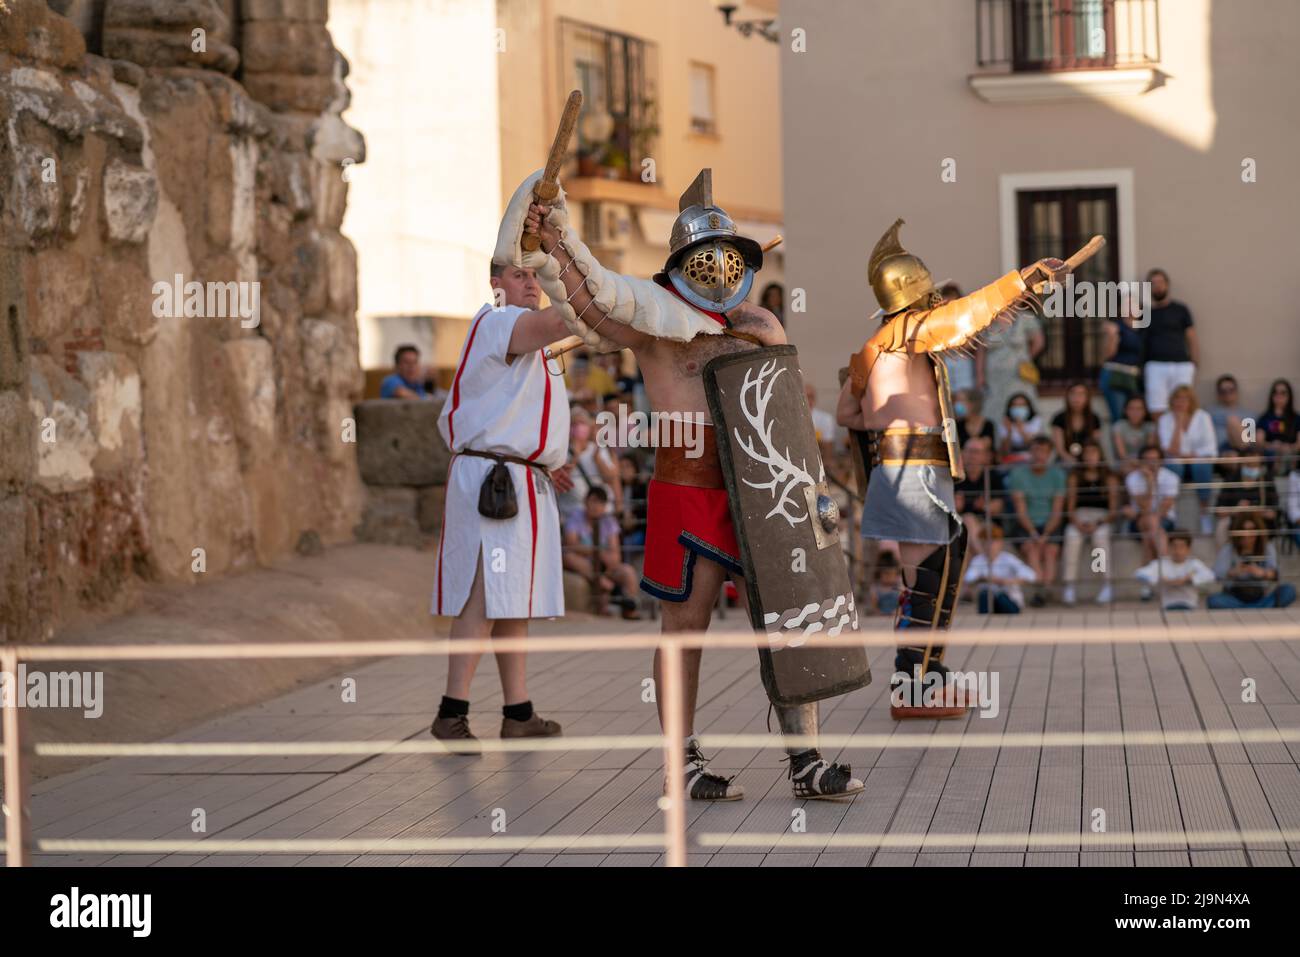 Merida, Extremadura, Spain - May 22, 2022 - Inauguration of the EMERITA LUDICA XXXII edition in the Temple of Diana with its gladiator fight Stock Photo